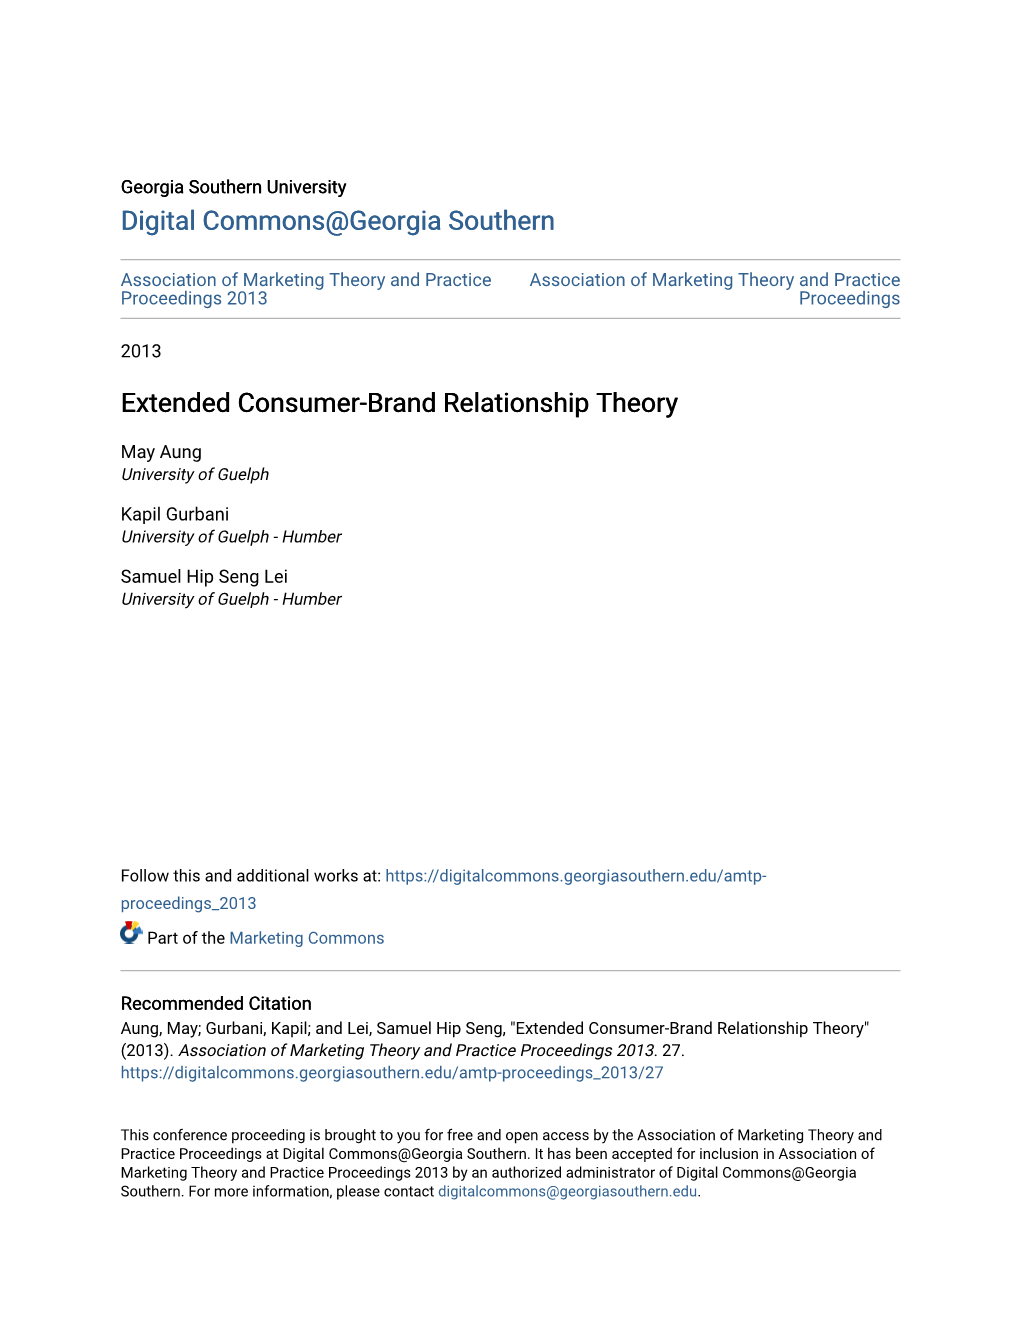 Extended Consumer-Brand Relationship Theory